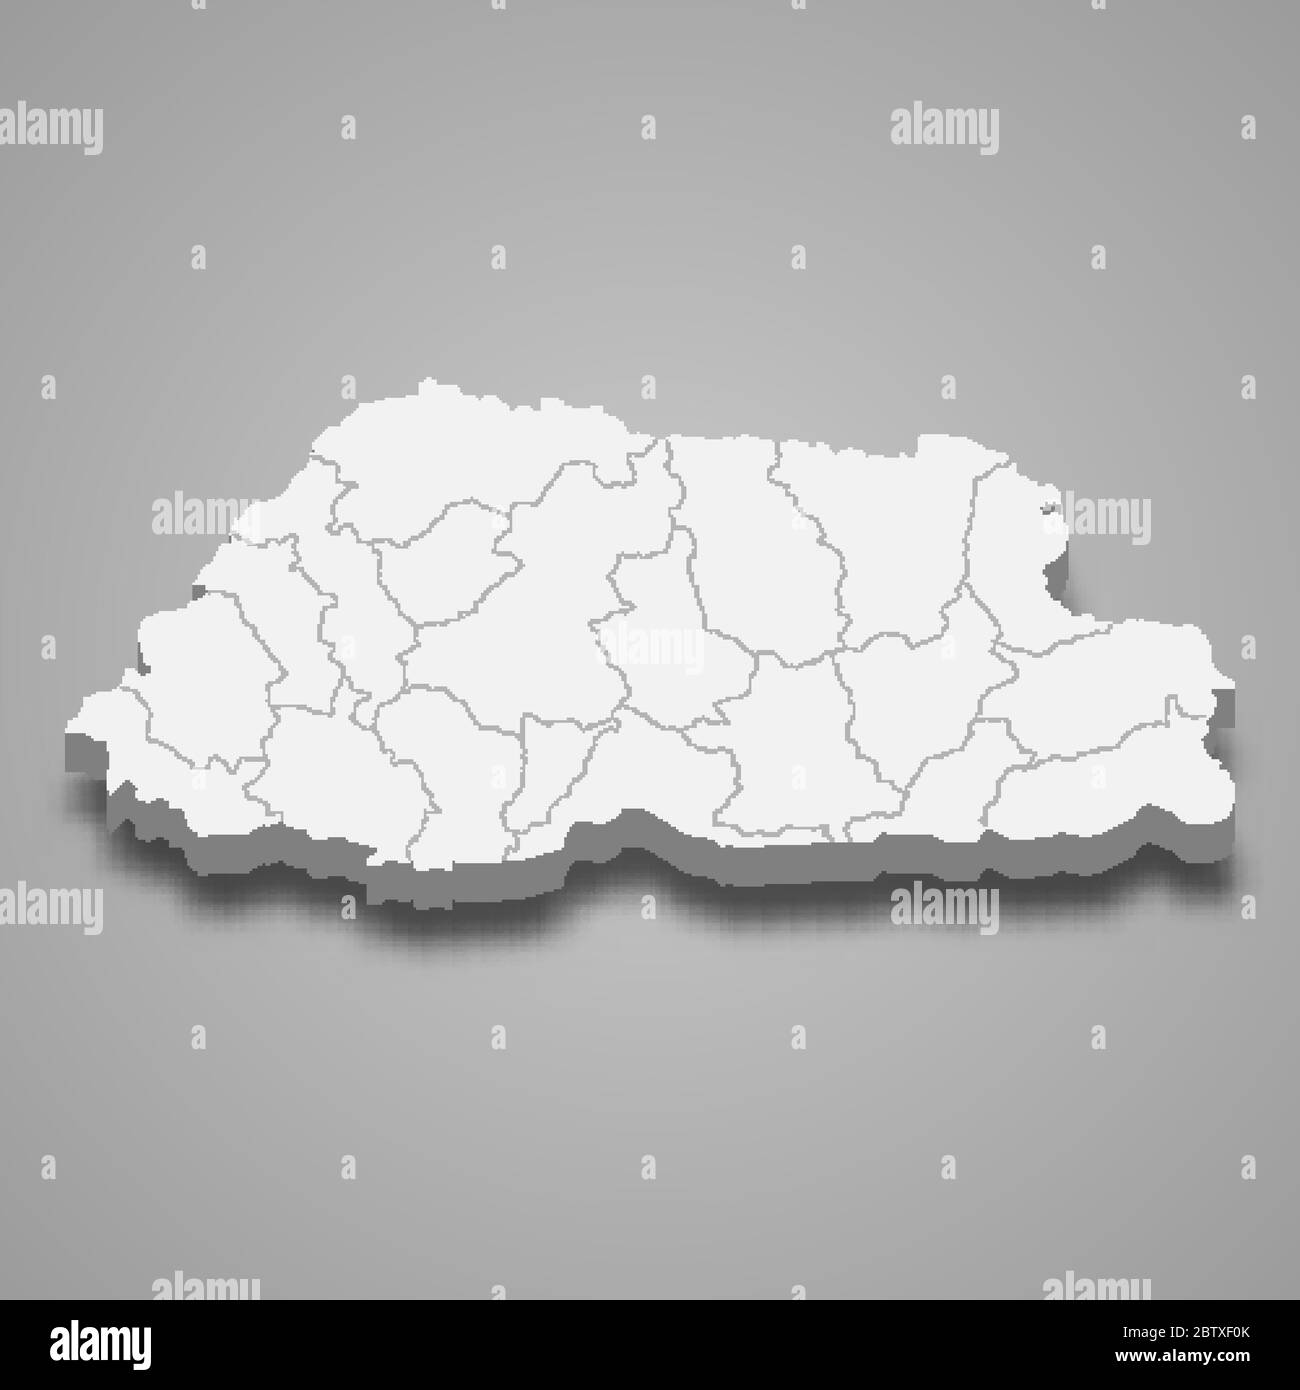 Map of bhutan Black and White Stock Photos & Images - Alamy